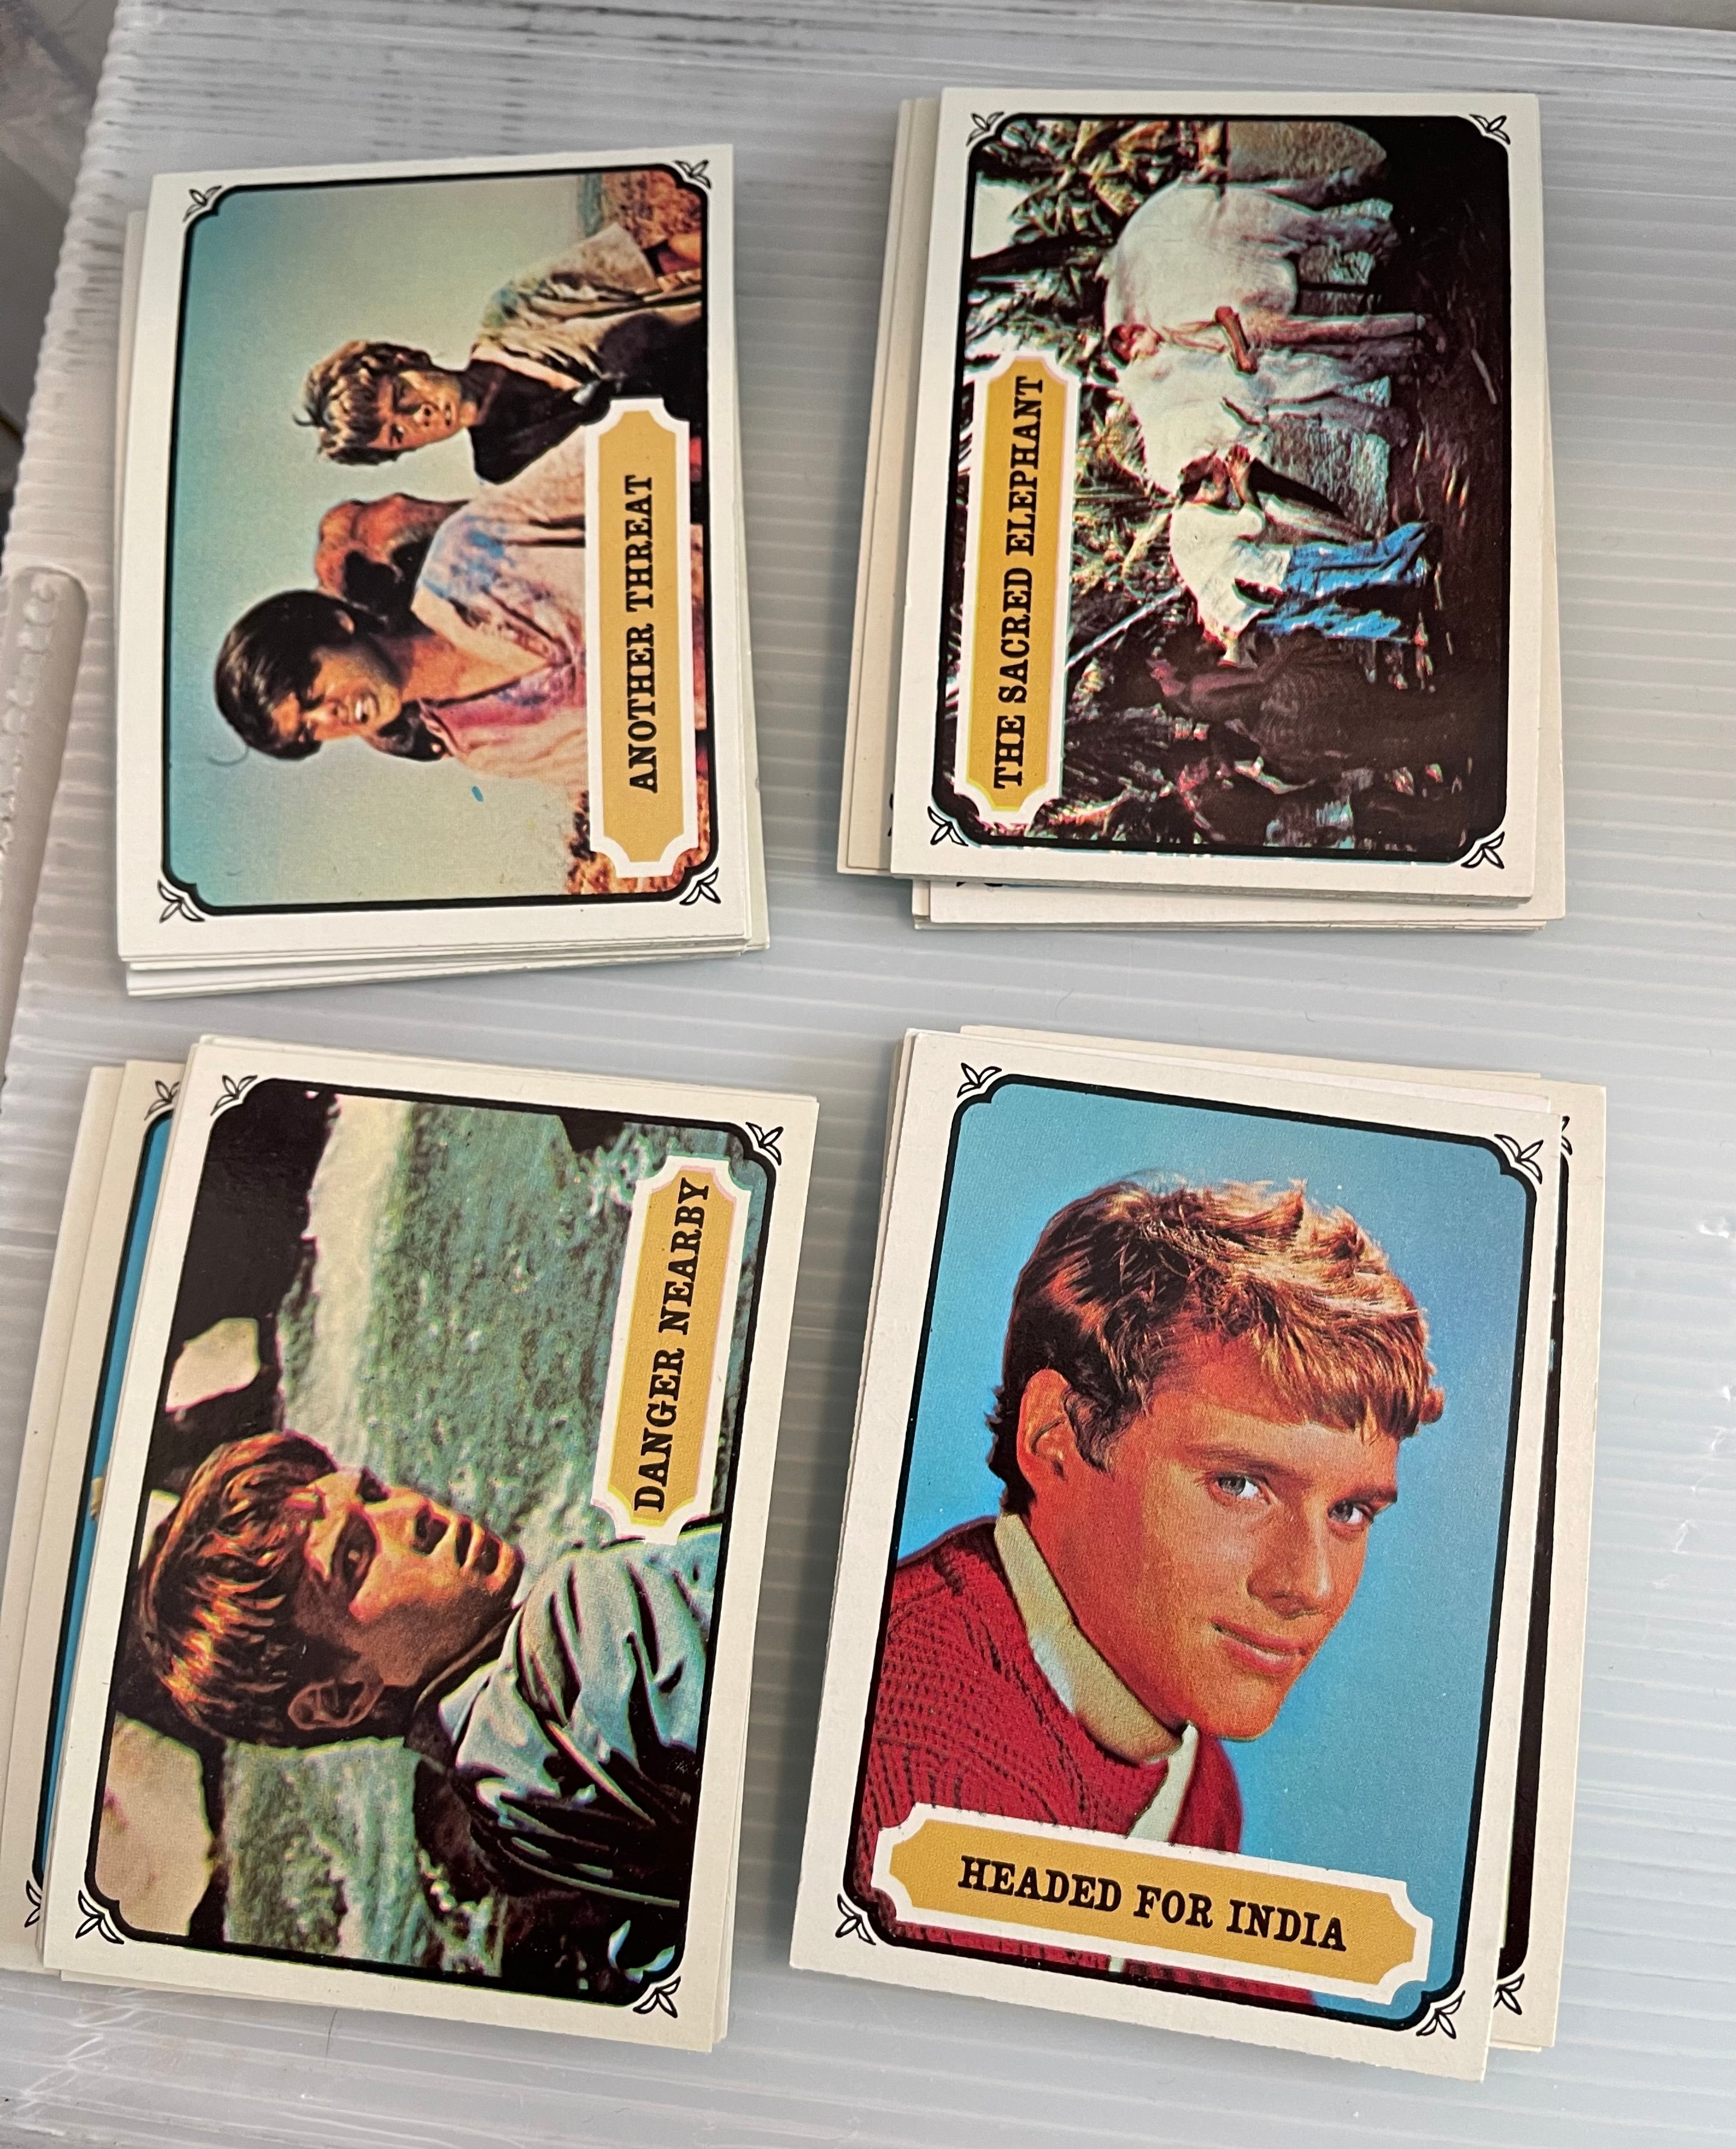 Maya Mysteries of India TV show cards set 1967